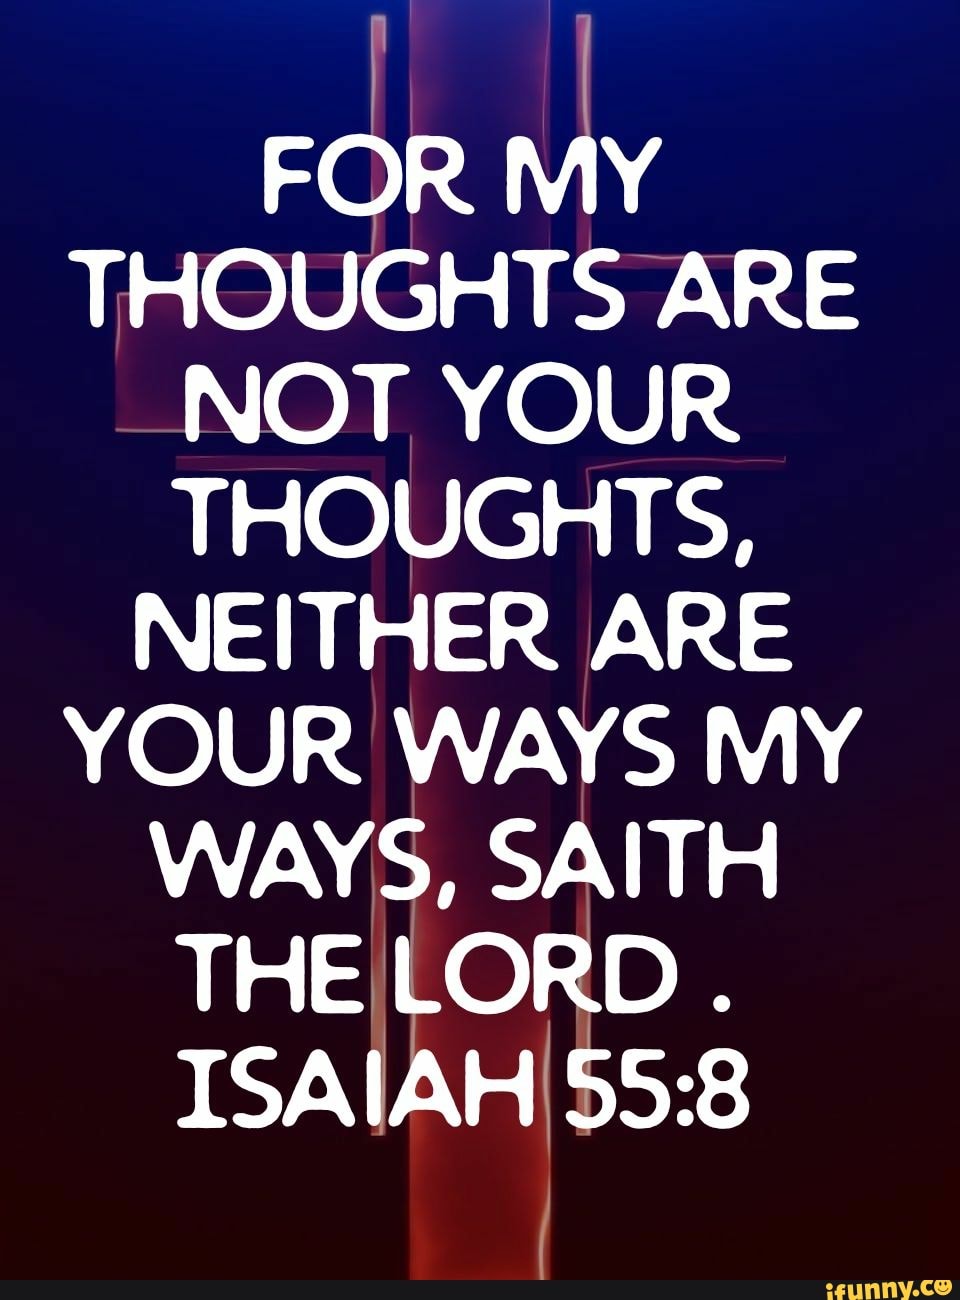 bible mythoughts are not